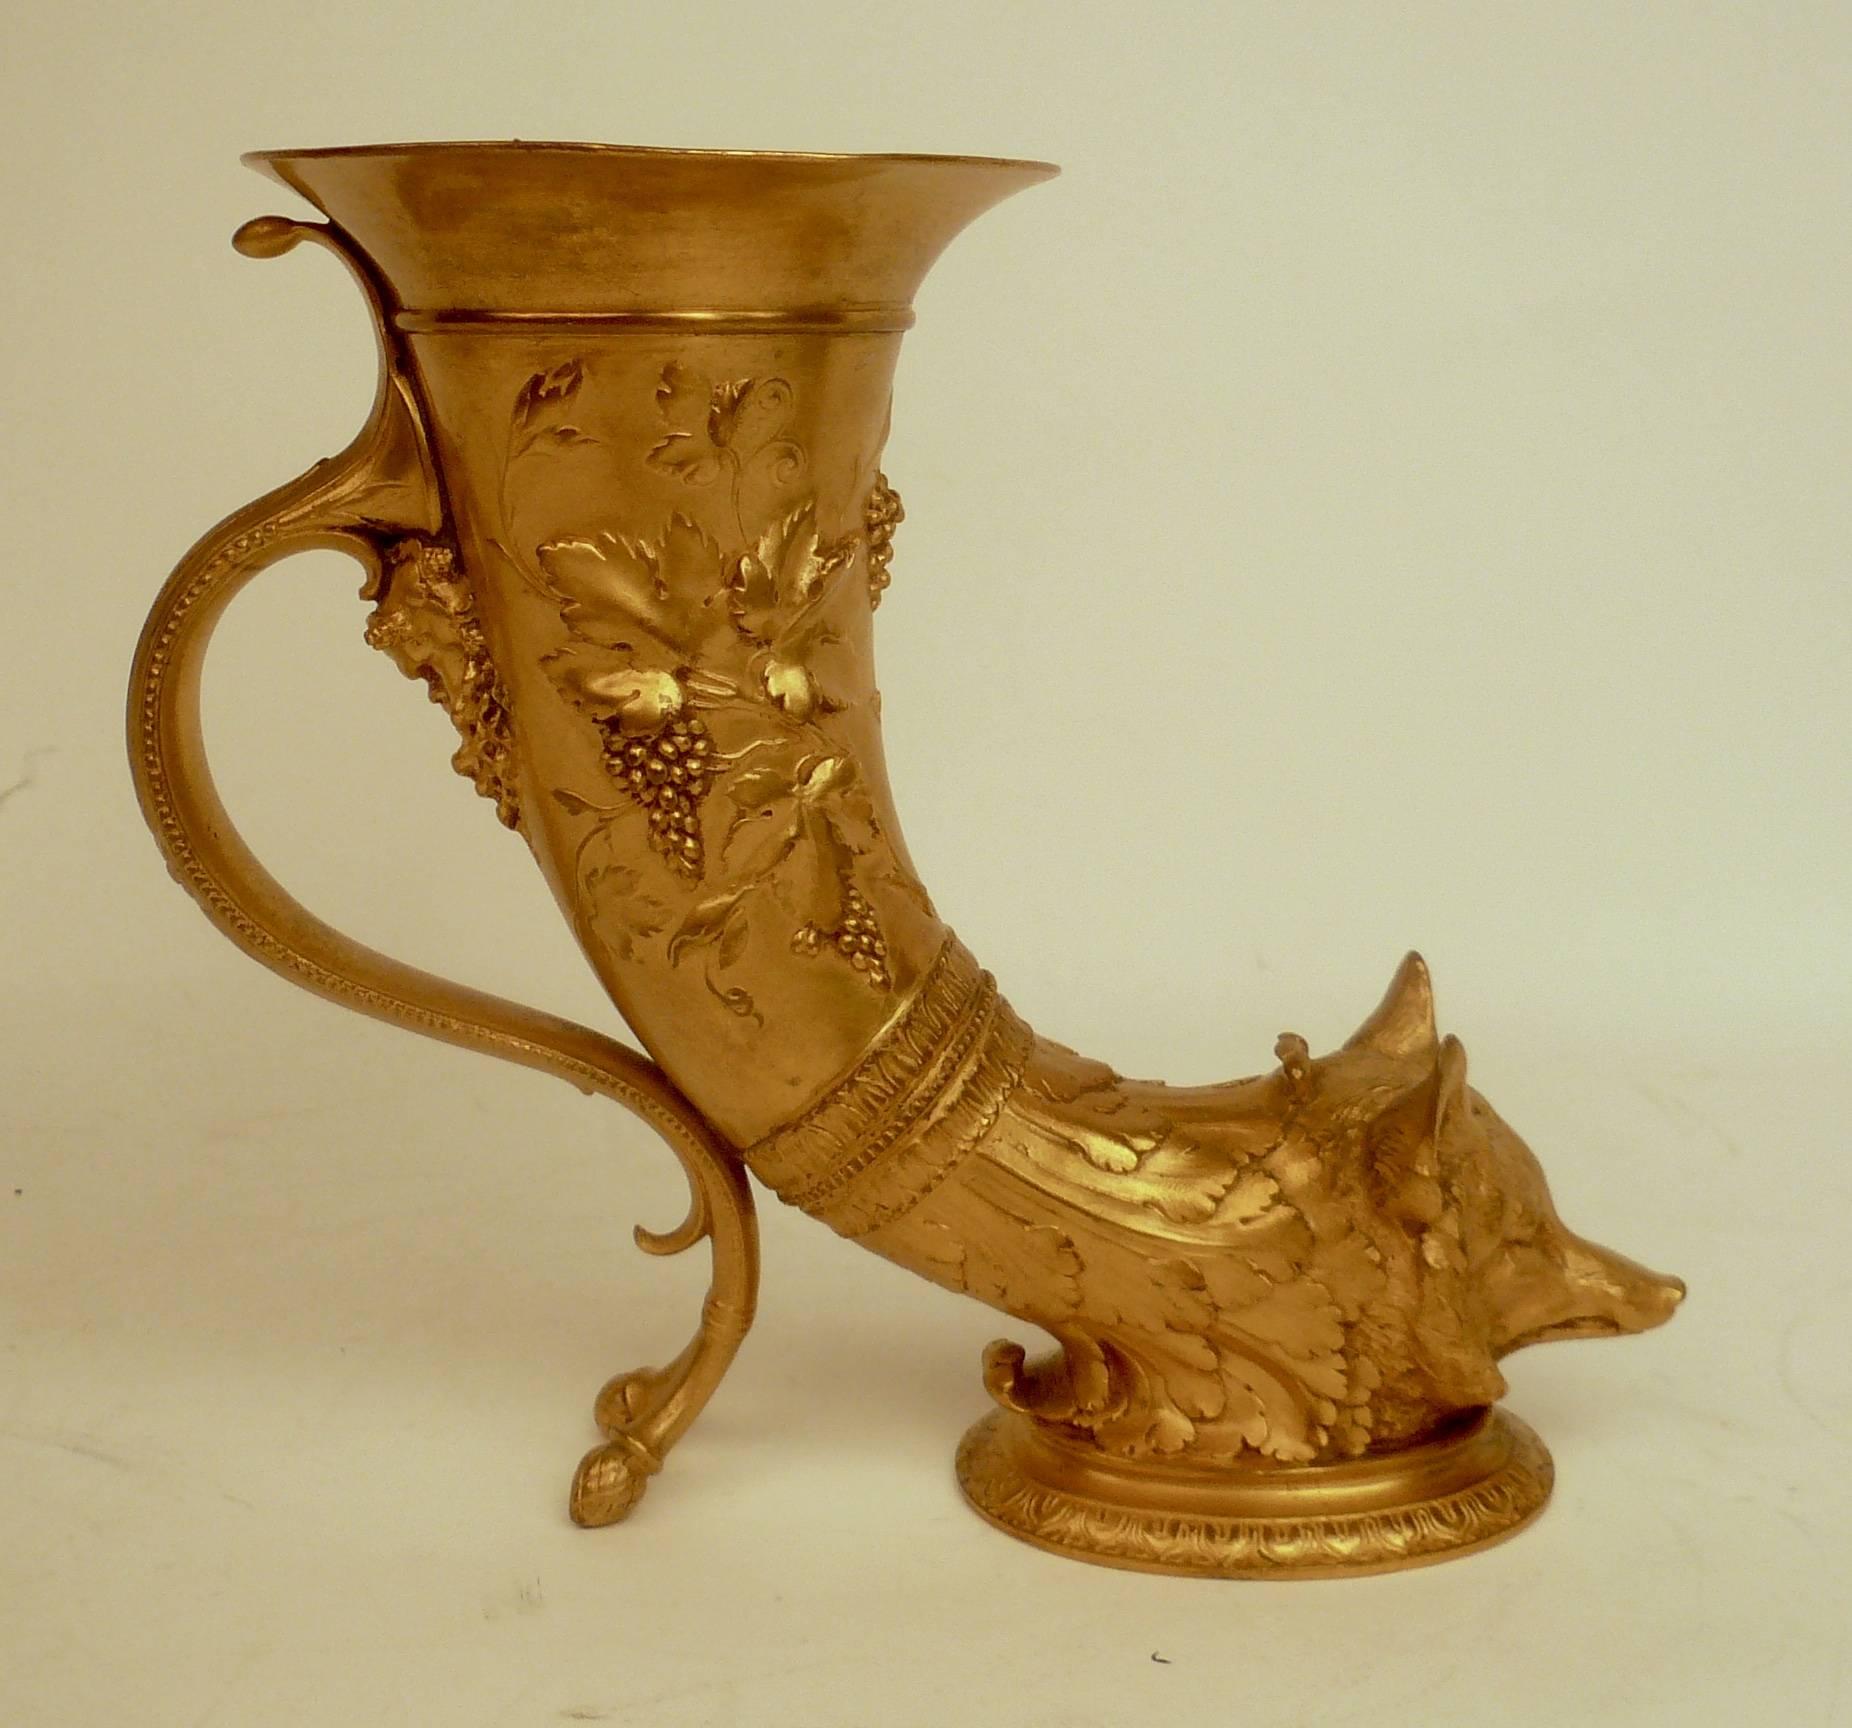 This hunt themed stirrup cup was designed by Louis-Constant Sevin and cast by the F. Barbedienne foundry. The same cup can be found in the permanent collection of the Musee d'Orsay in Paris France.